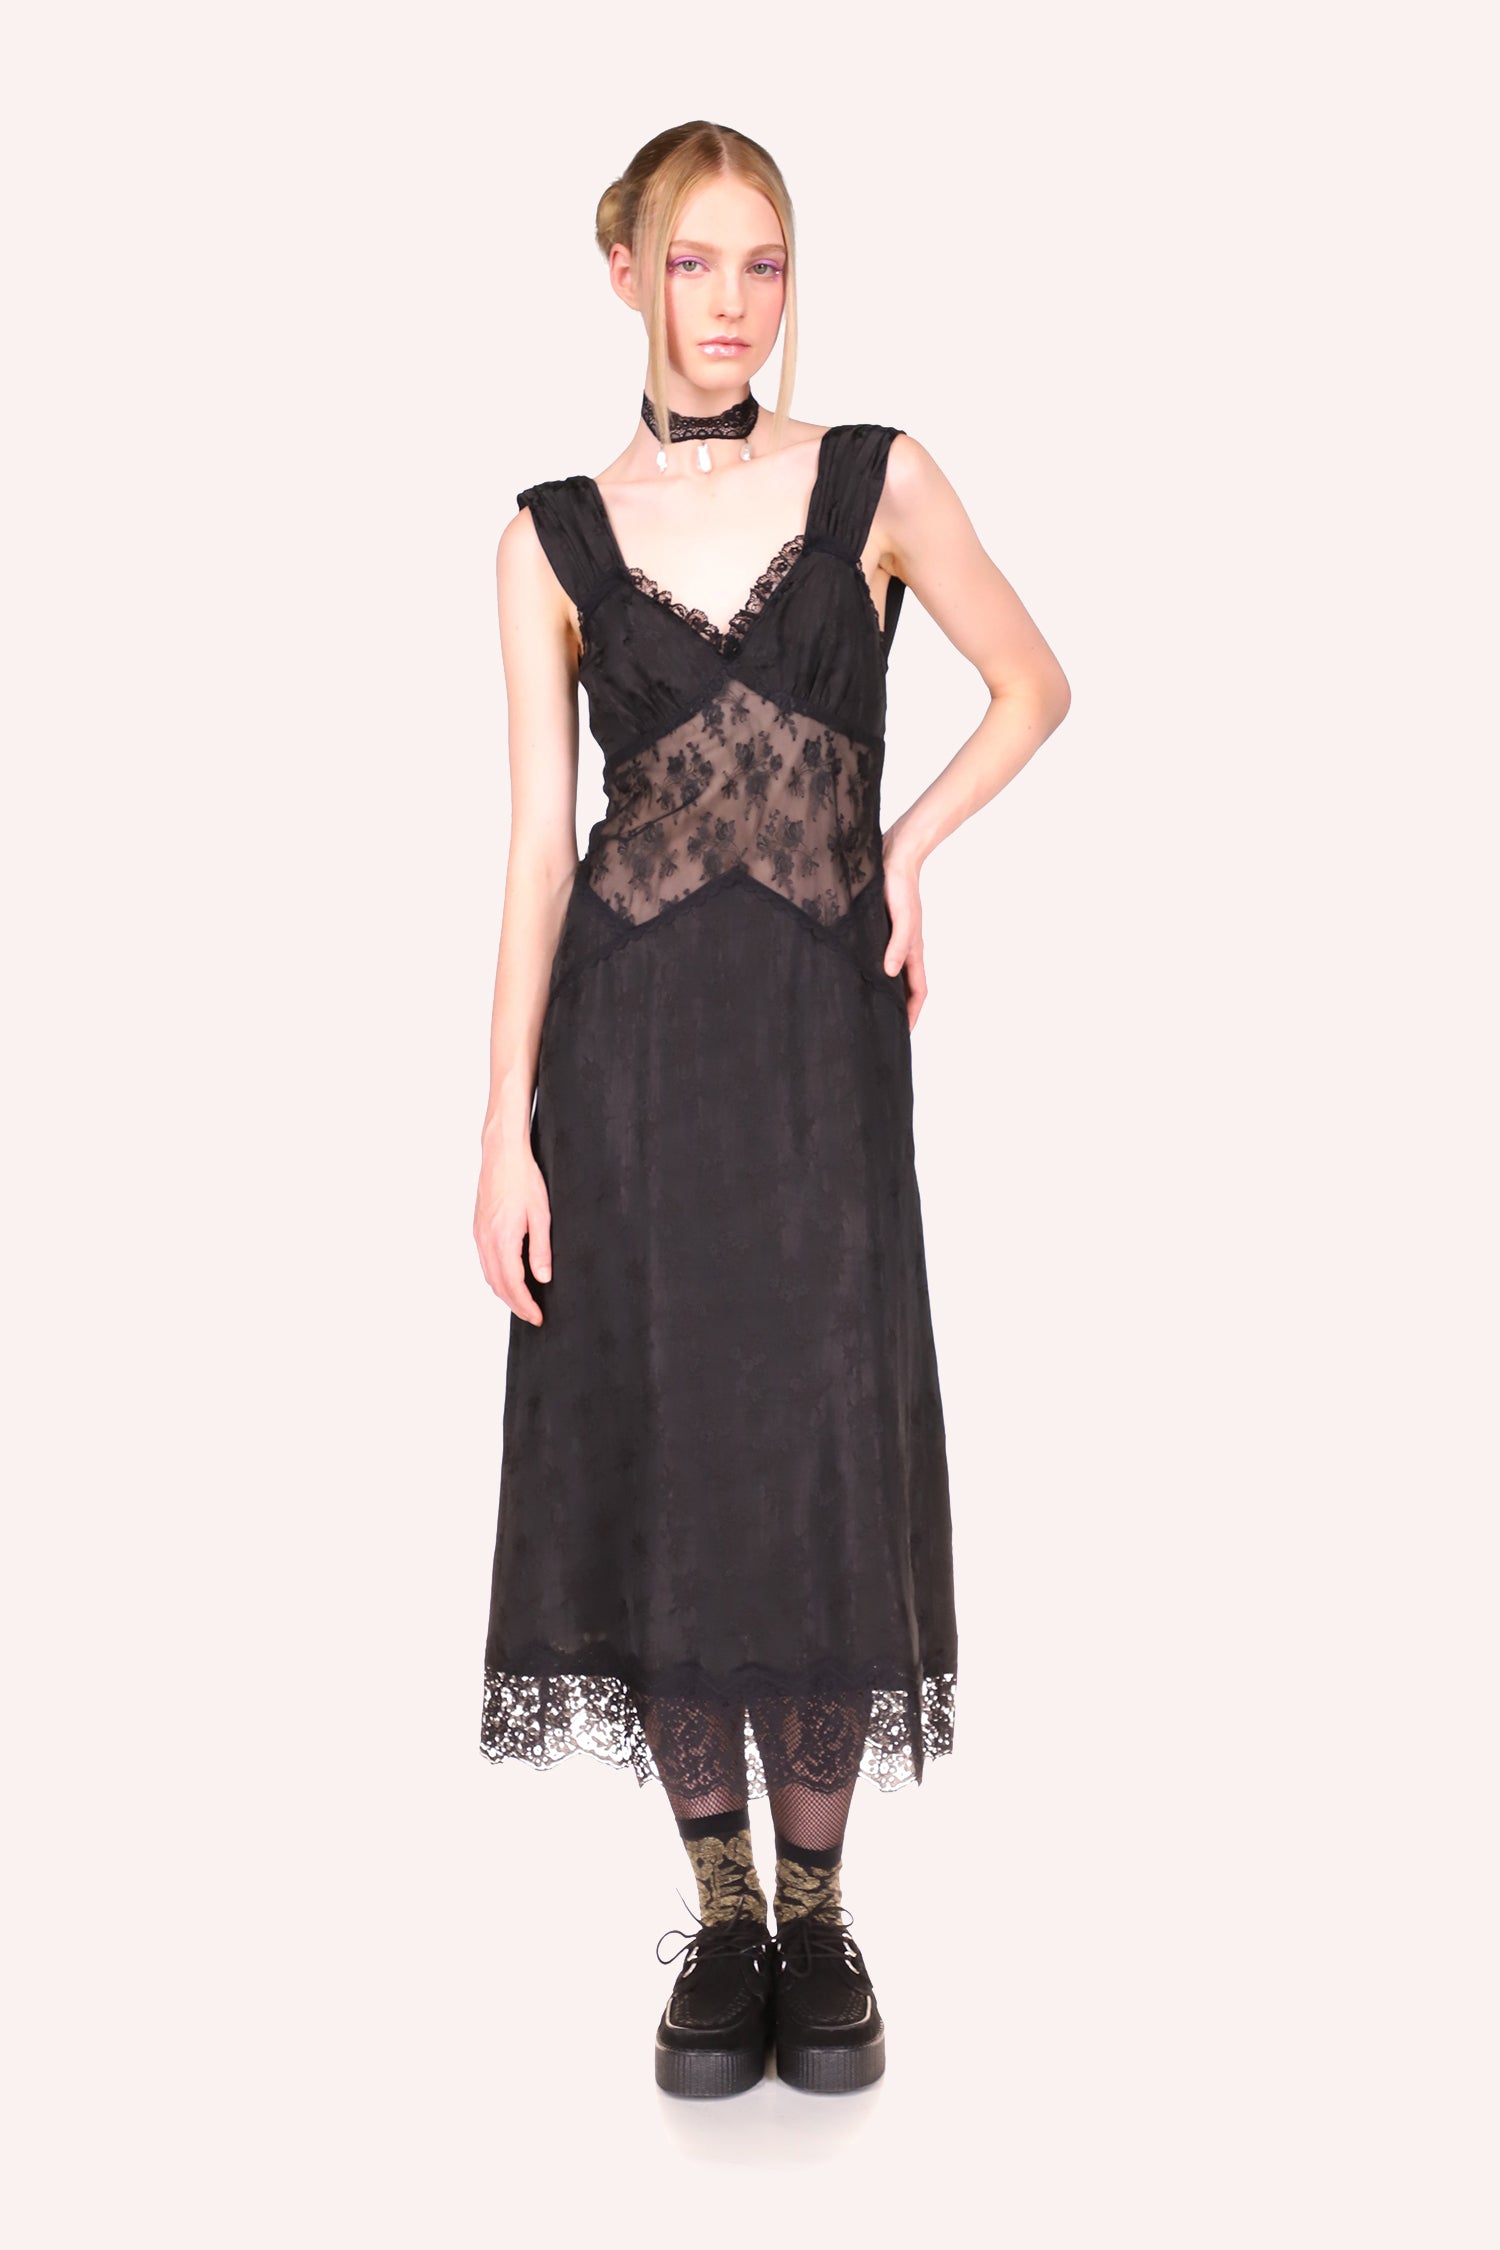 Floral Jacquard and Lace Dress black,  Detail of the black lace in front, with floral design 